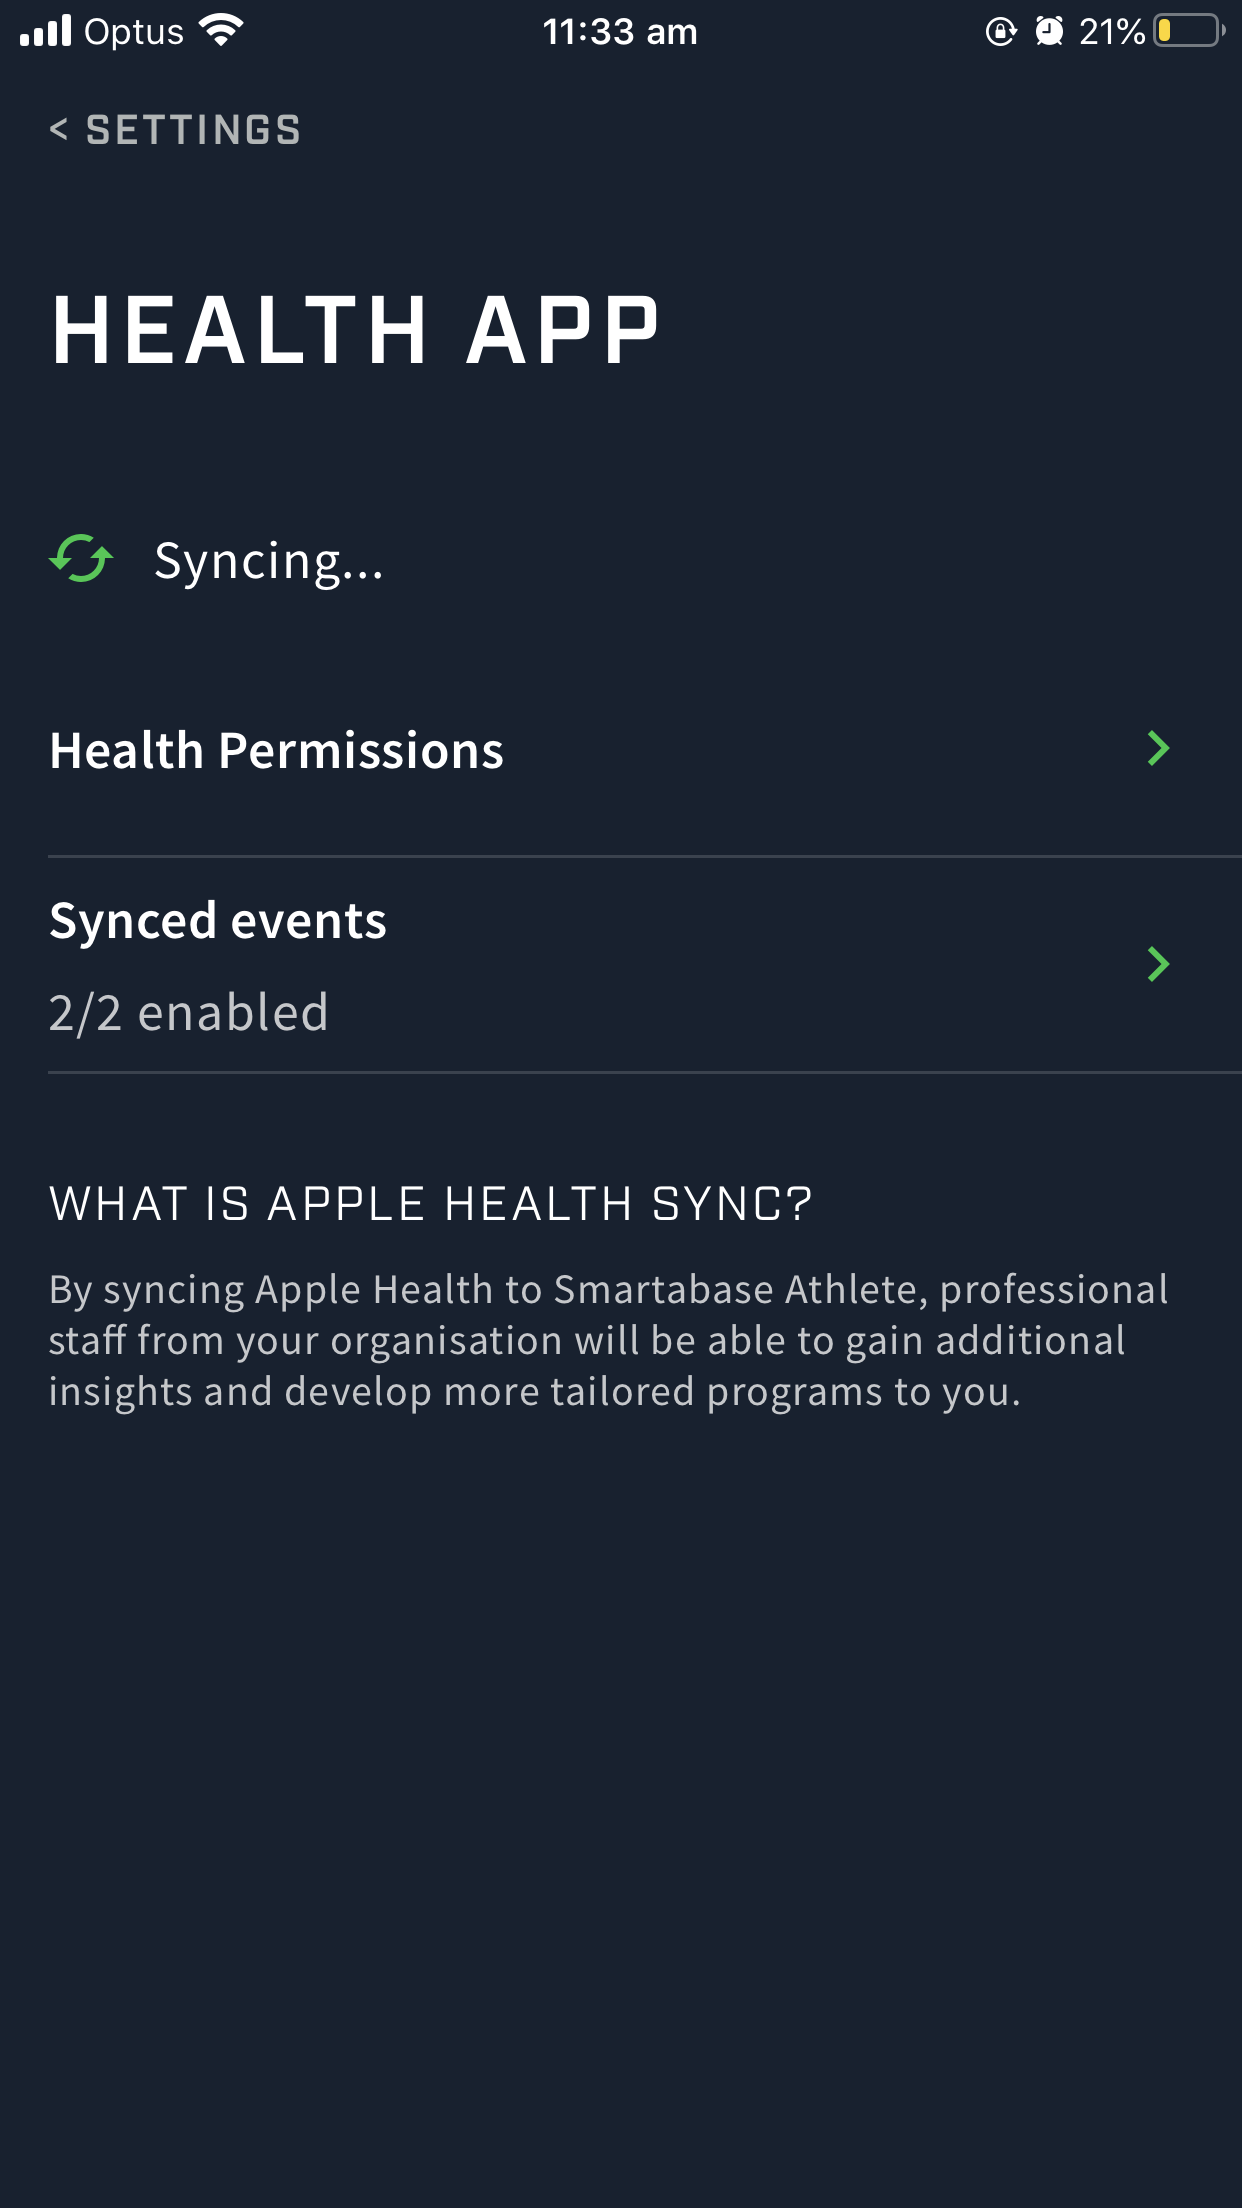 A screenshot showing the Health App settings screen on the Athlete app